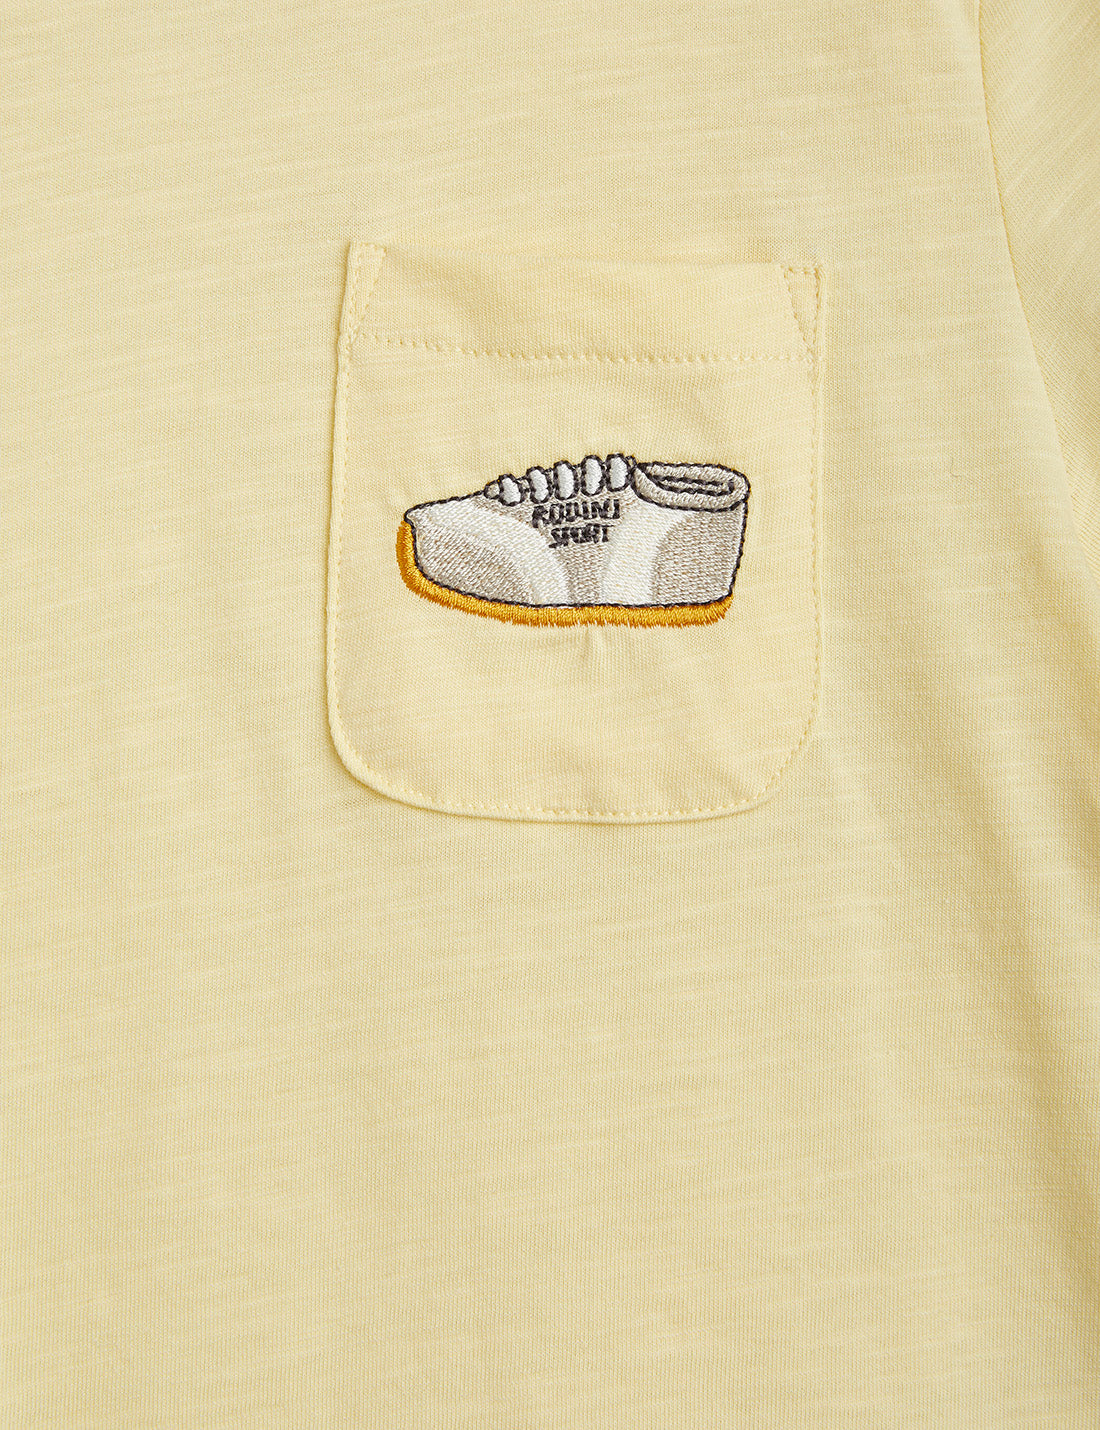 Jogging Embroidered Short Sleeve Tee | Yellow